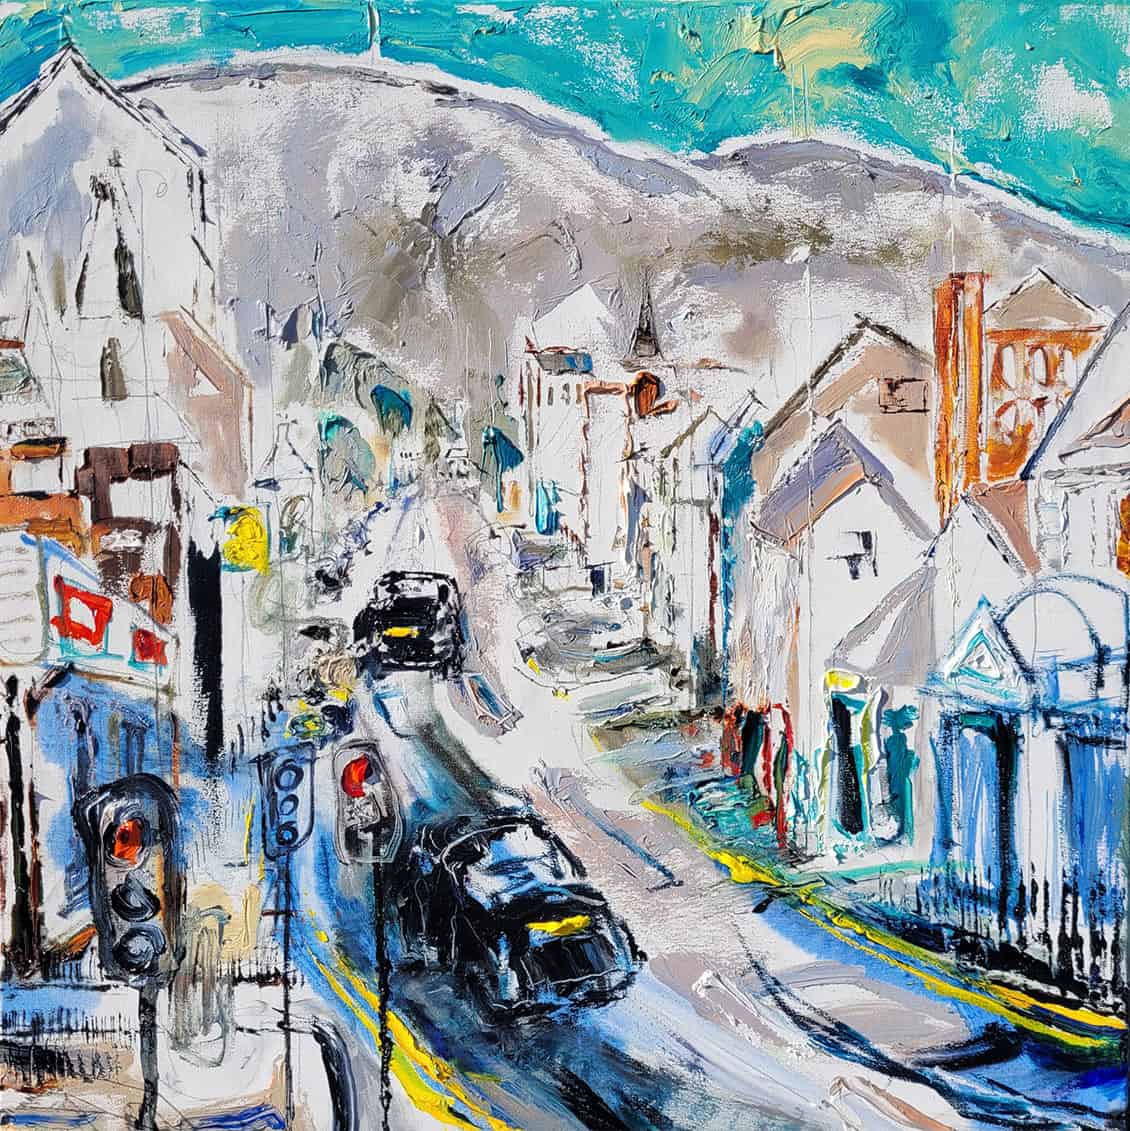 A Fine Art Painting of the Shankill Road called "Up The Shankill" by Una O Grady